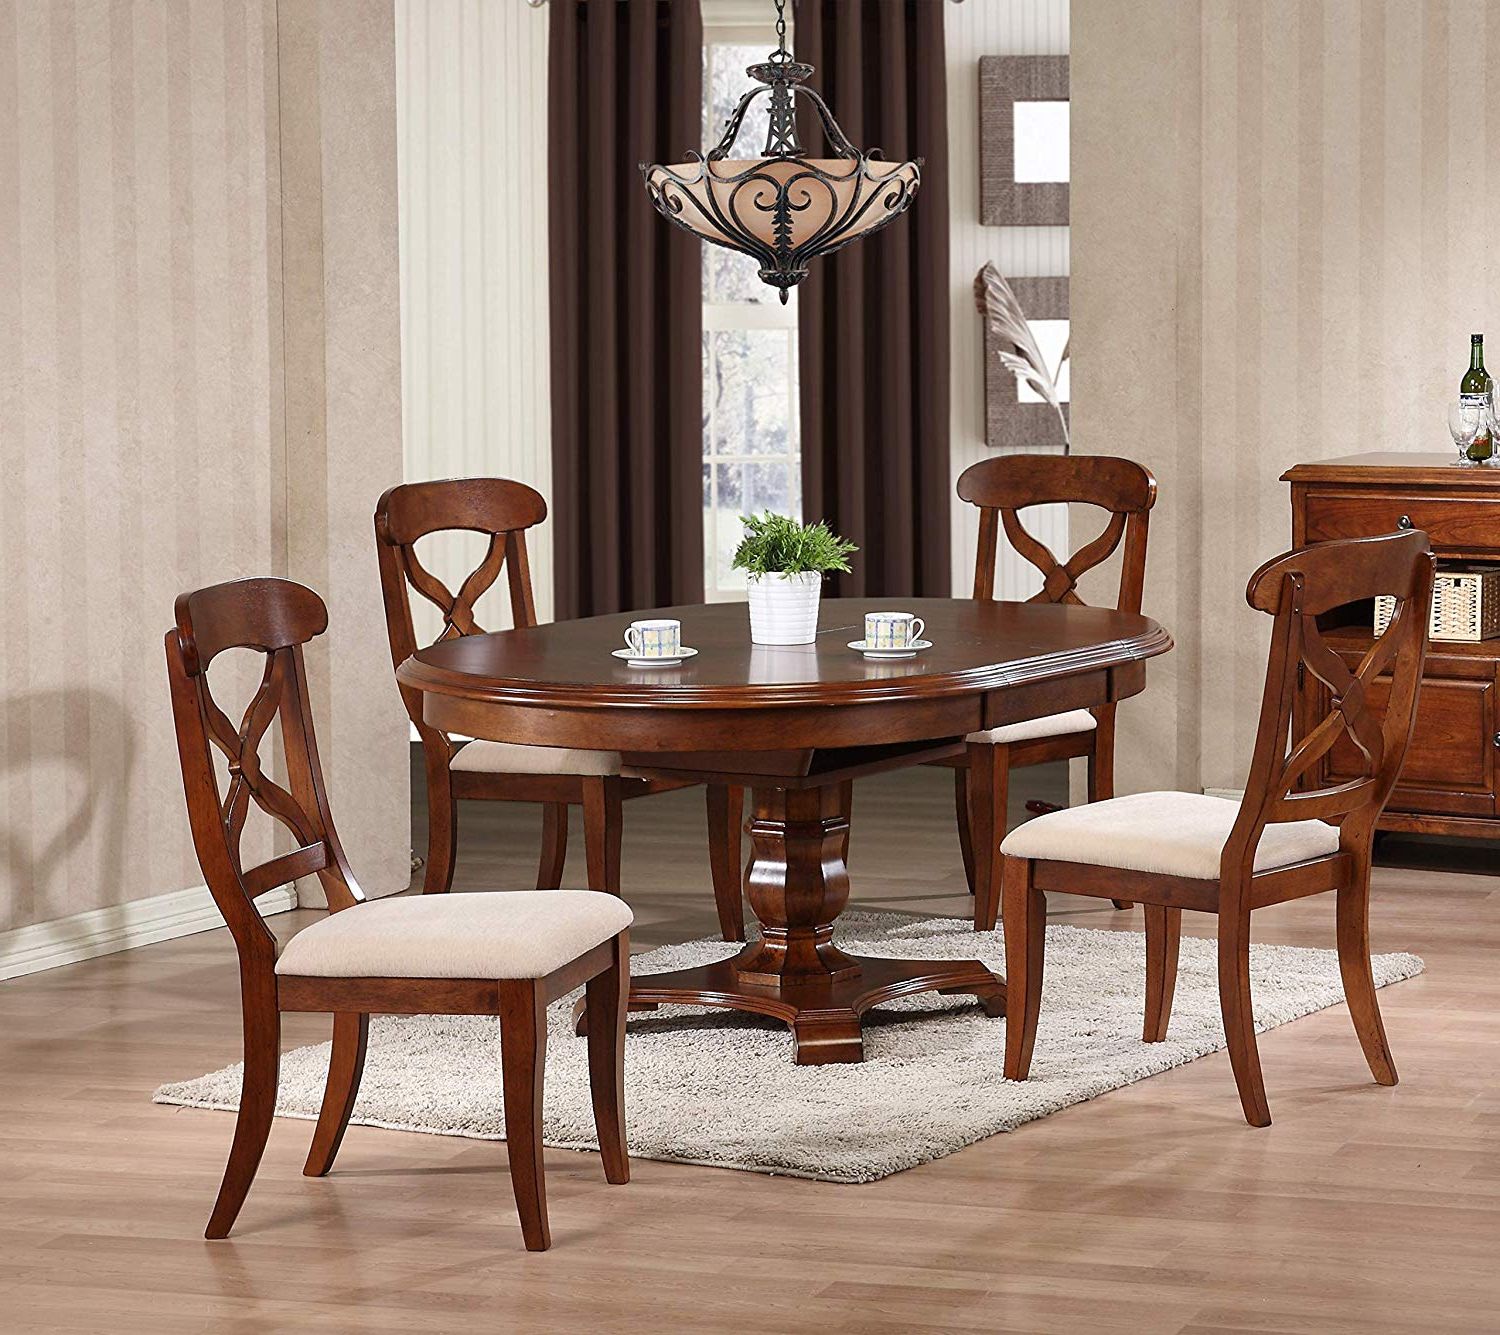 Amazon – Sunset Trading Dlu Adw4866 C12 Ct5pc Andrews Throughout Fashionable Distressed Walnut And Black Finish Wood Modern Country Dining Tables (View 10 of 25)